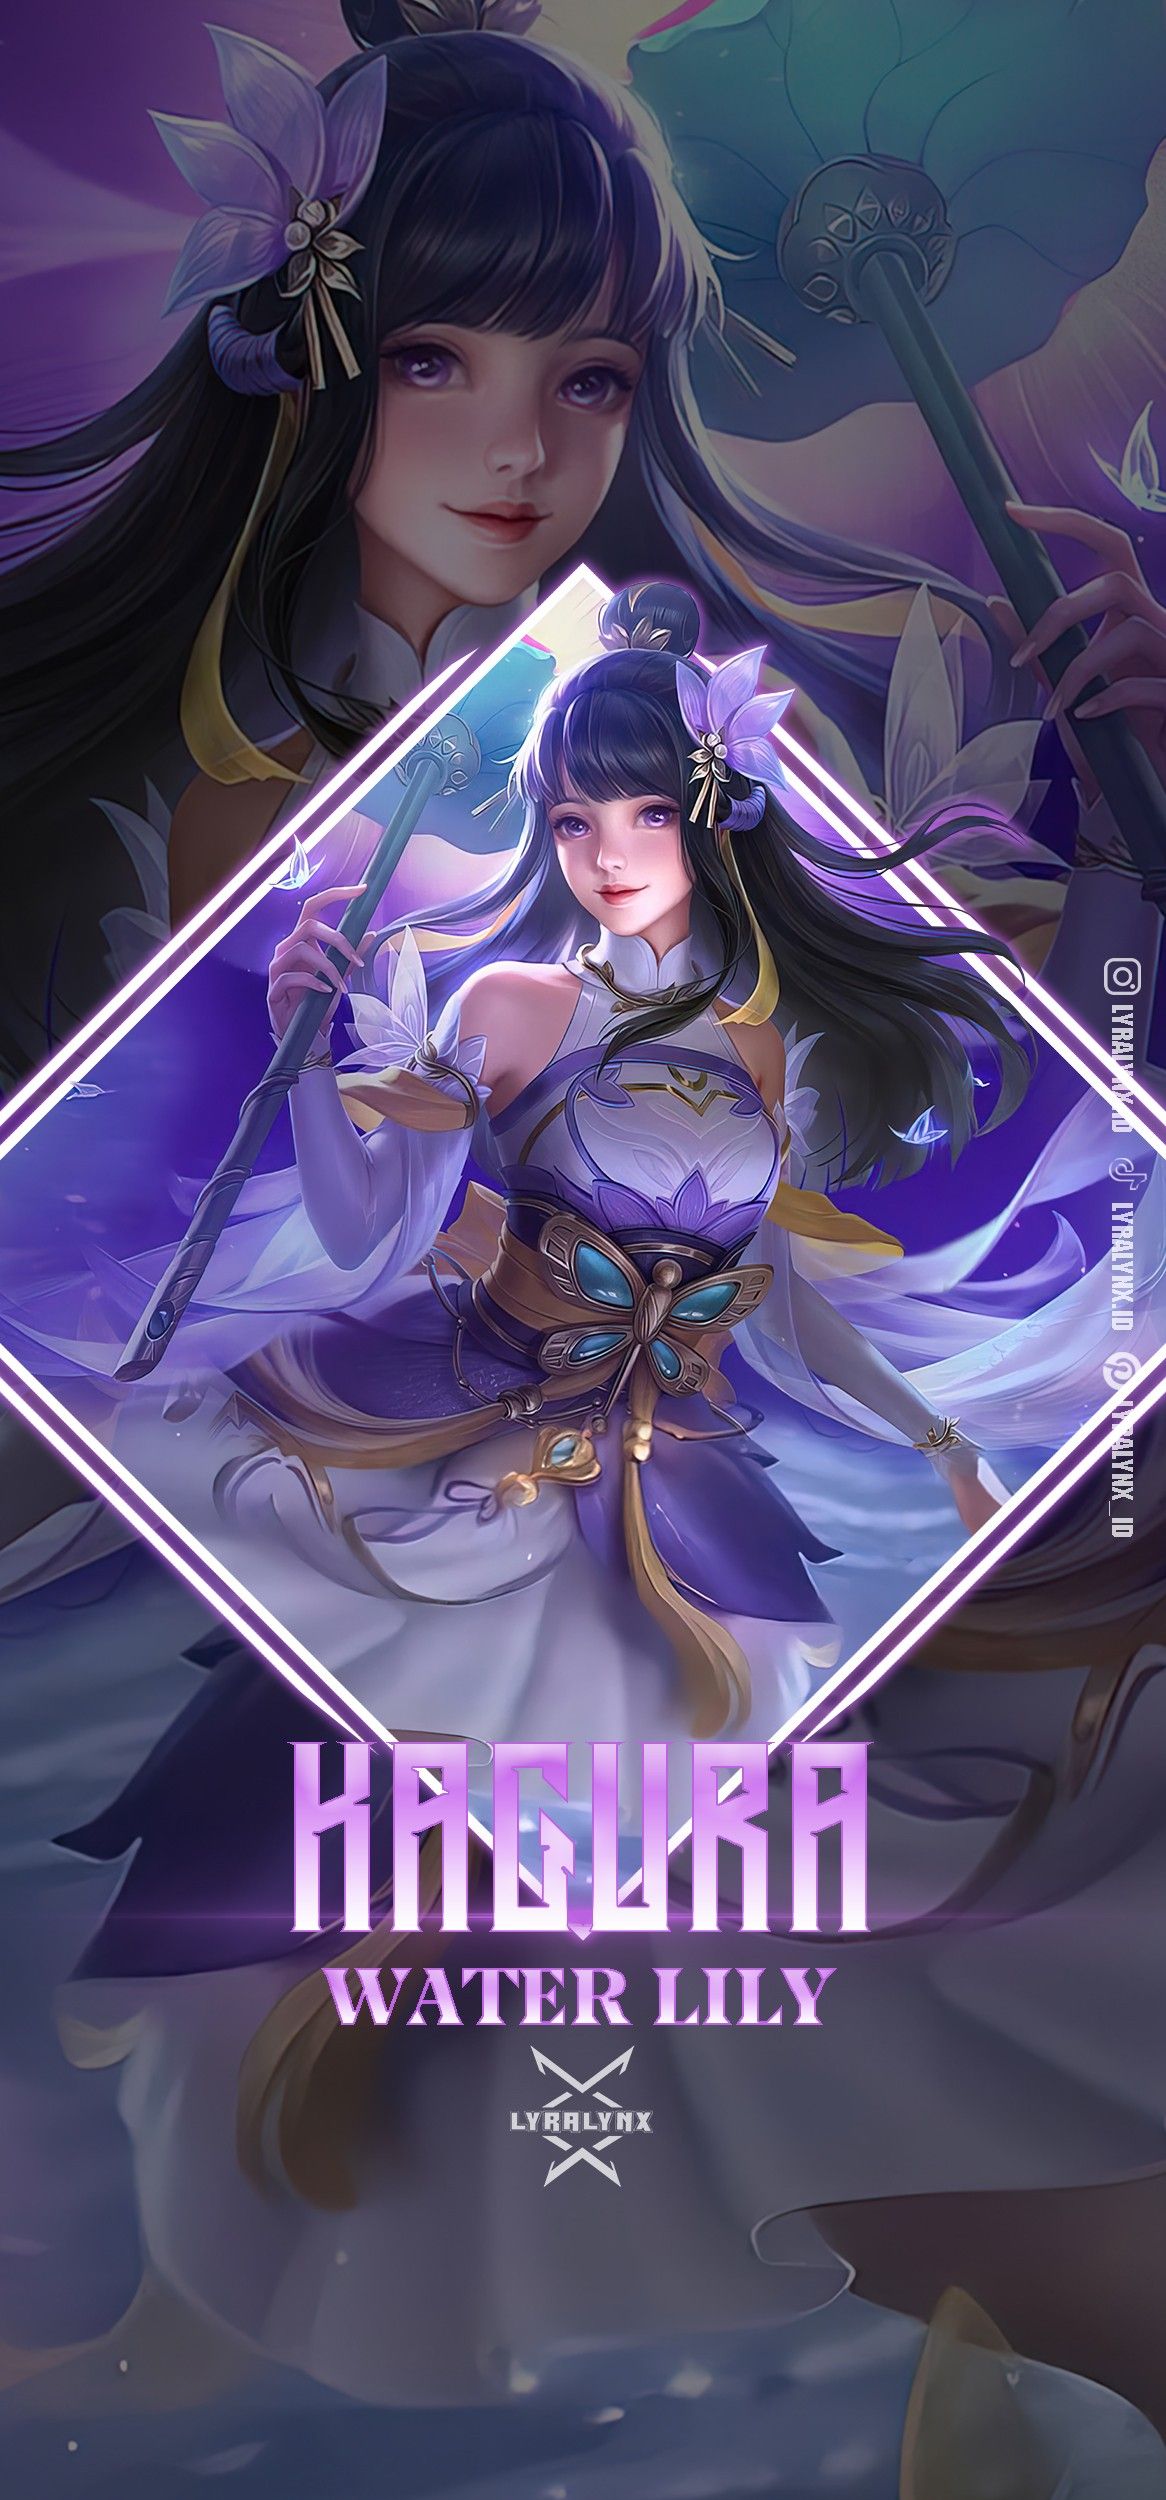 Kagura Water Lily. Mobile legend wallpaper, Lily wallpaper, Water lily